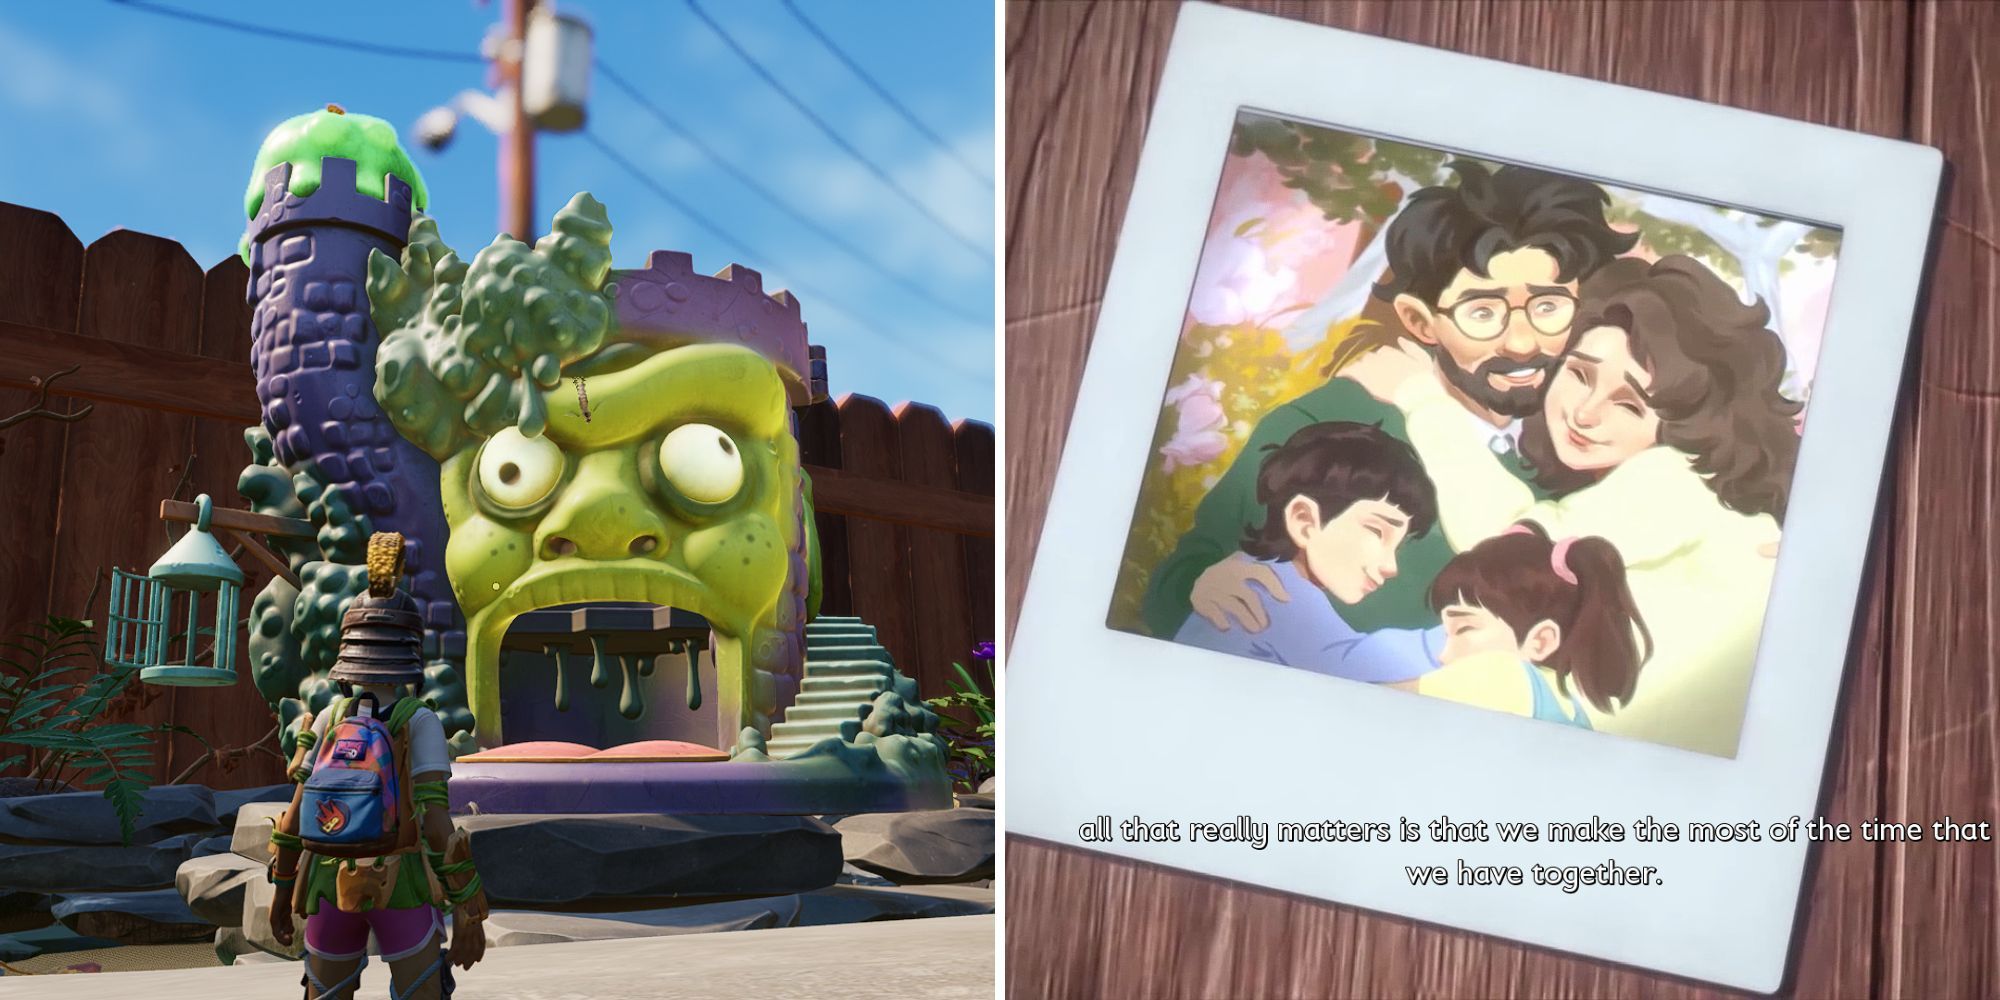 Left: Hoops looks at the Castle Mordoc Playset, which looks like a purple castle with goo pouring down and a green face as an entrance;  right: A Polaroid on a wooden table shows Dr. Wendell being embraced by his wife, Trudy, and their son and daughter